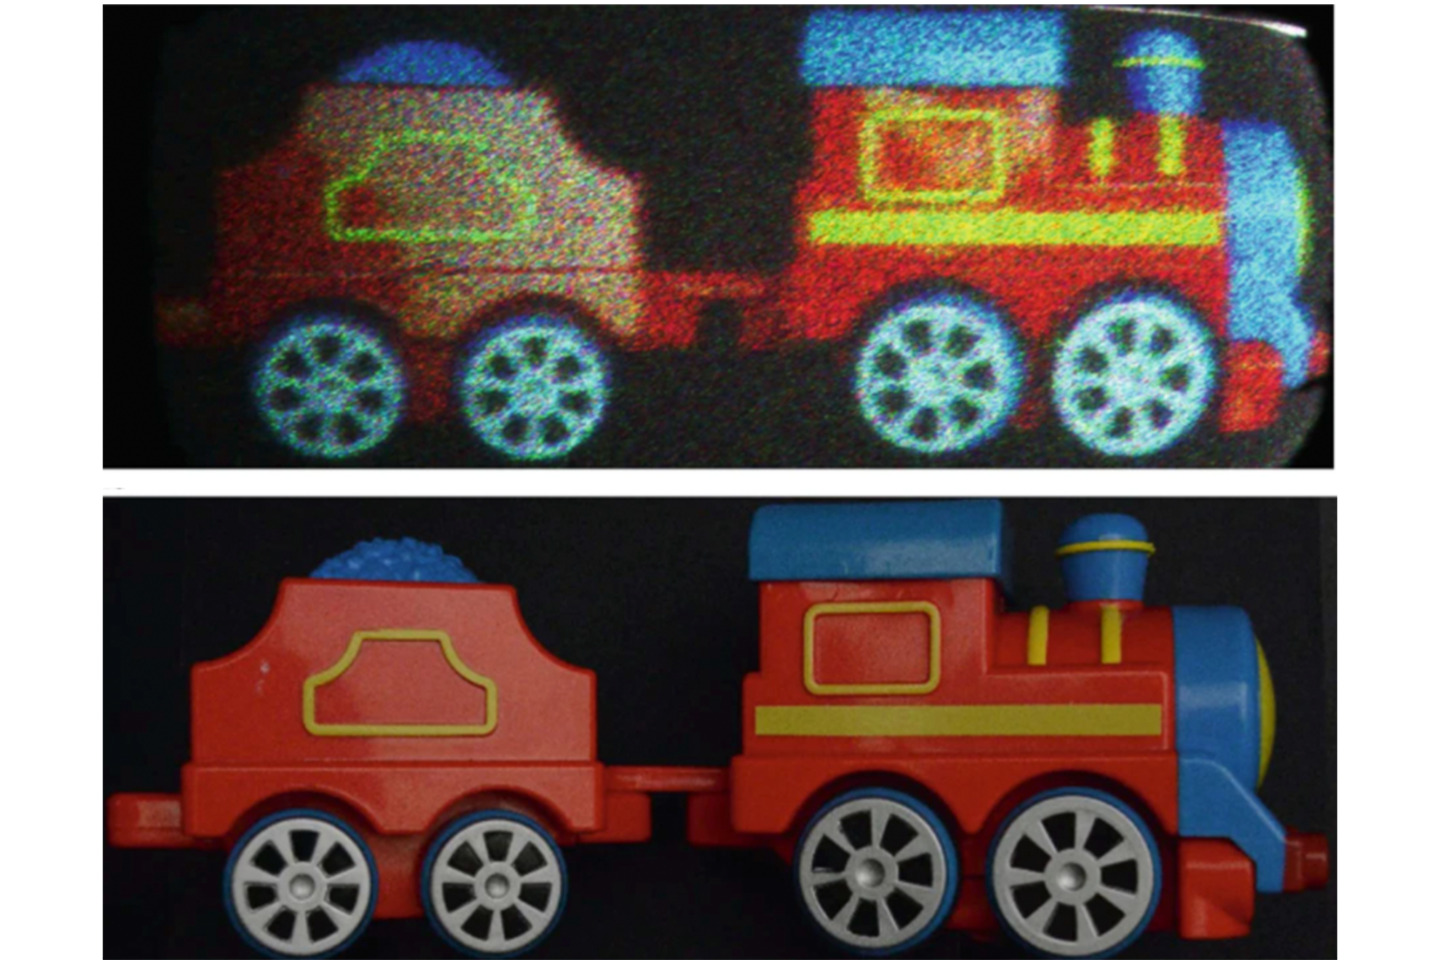 Reconstructed holographic images of a toy train (top) with holobricks and original image captured by a camera (bottom) Credit: CAPE